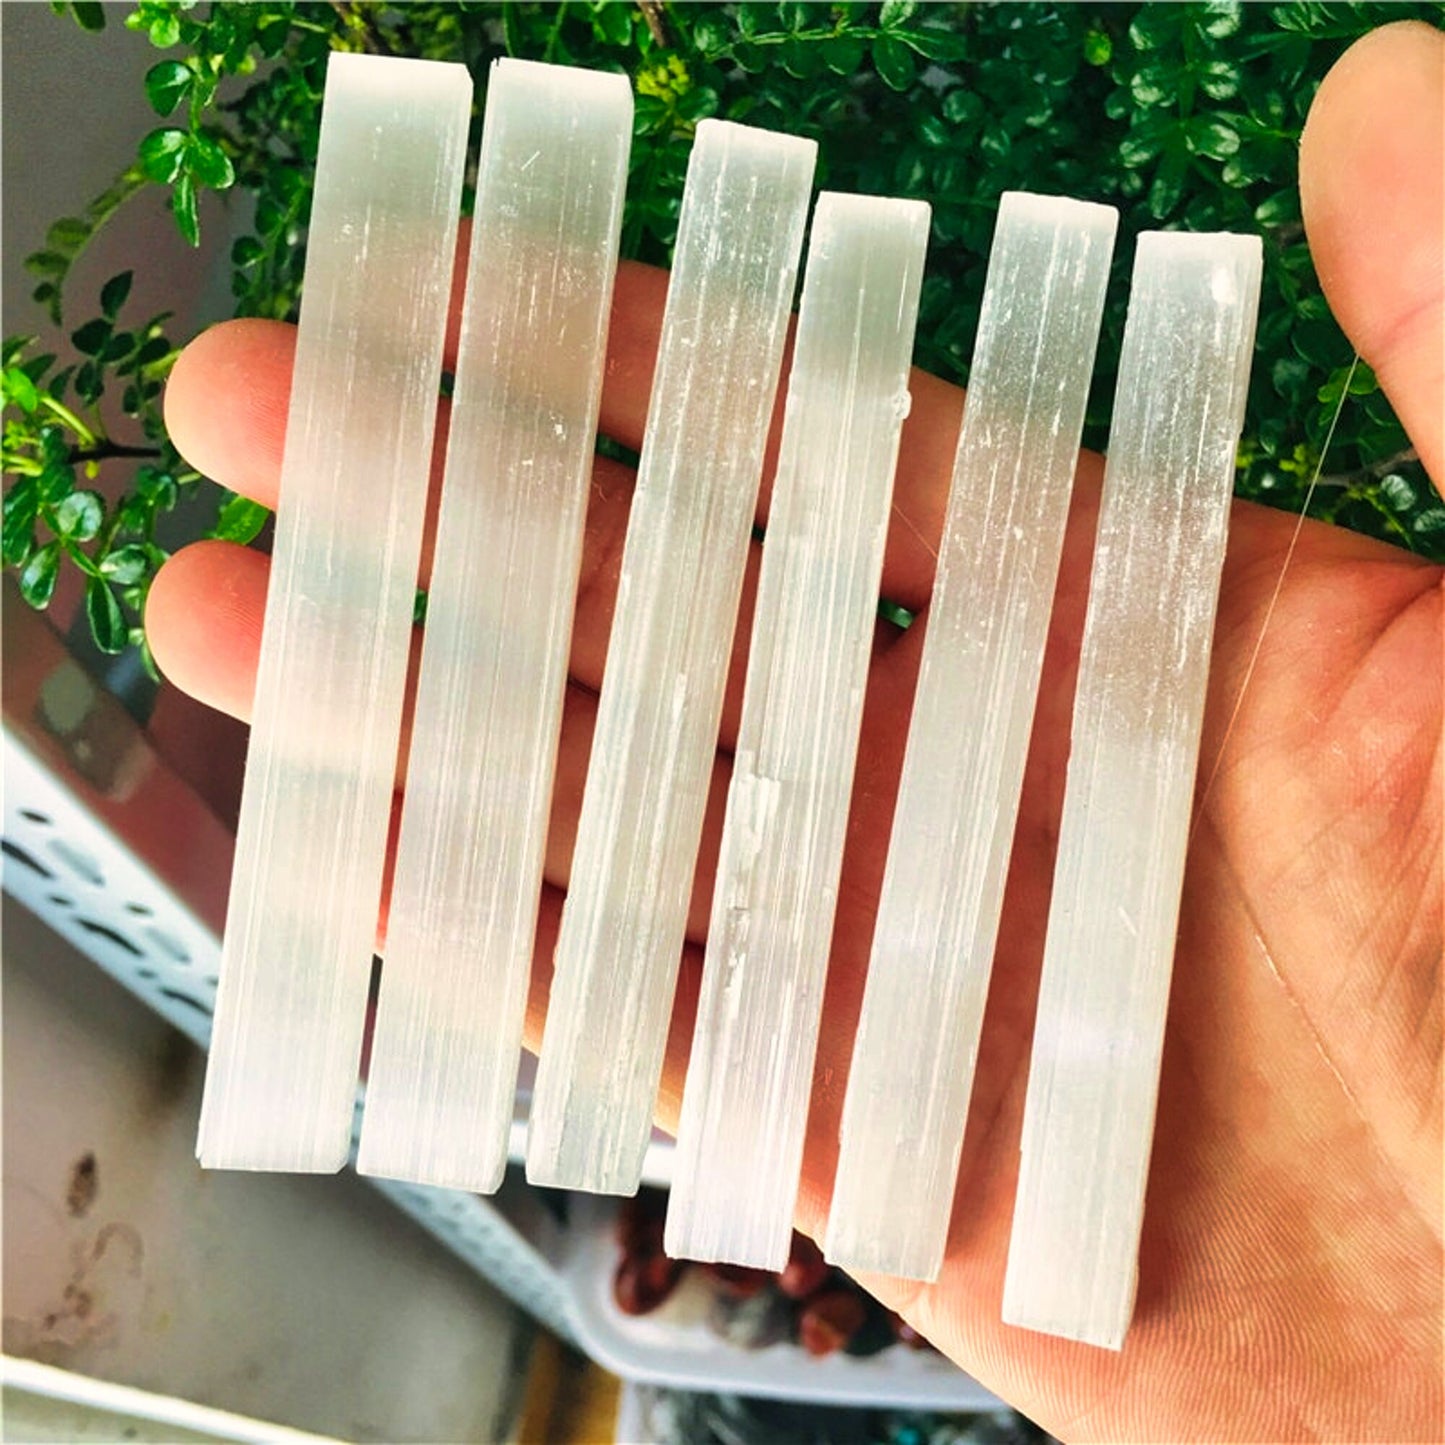 Natural Selenite Quartz Crystal Sticks - 9-10cm, Cleansing Crystal Chips and Stones for Air Purification - Minerals Specimen